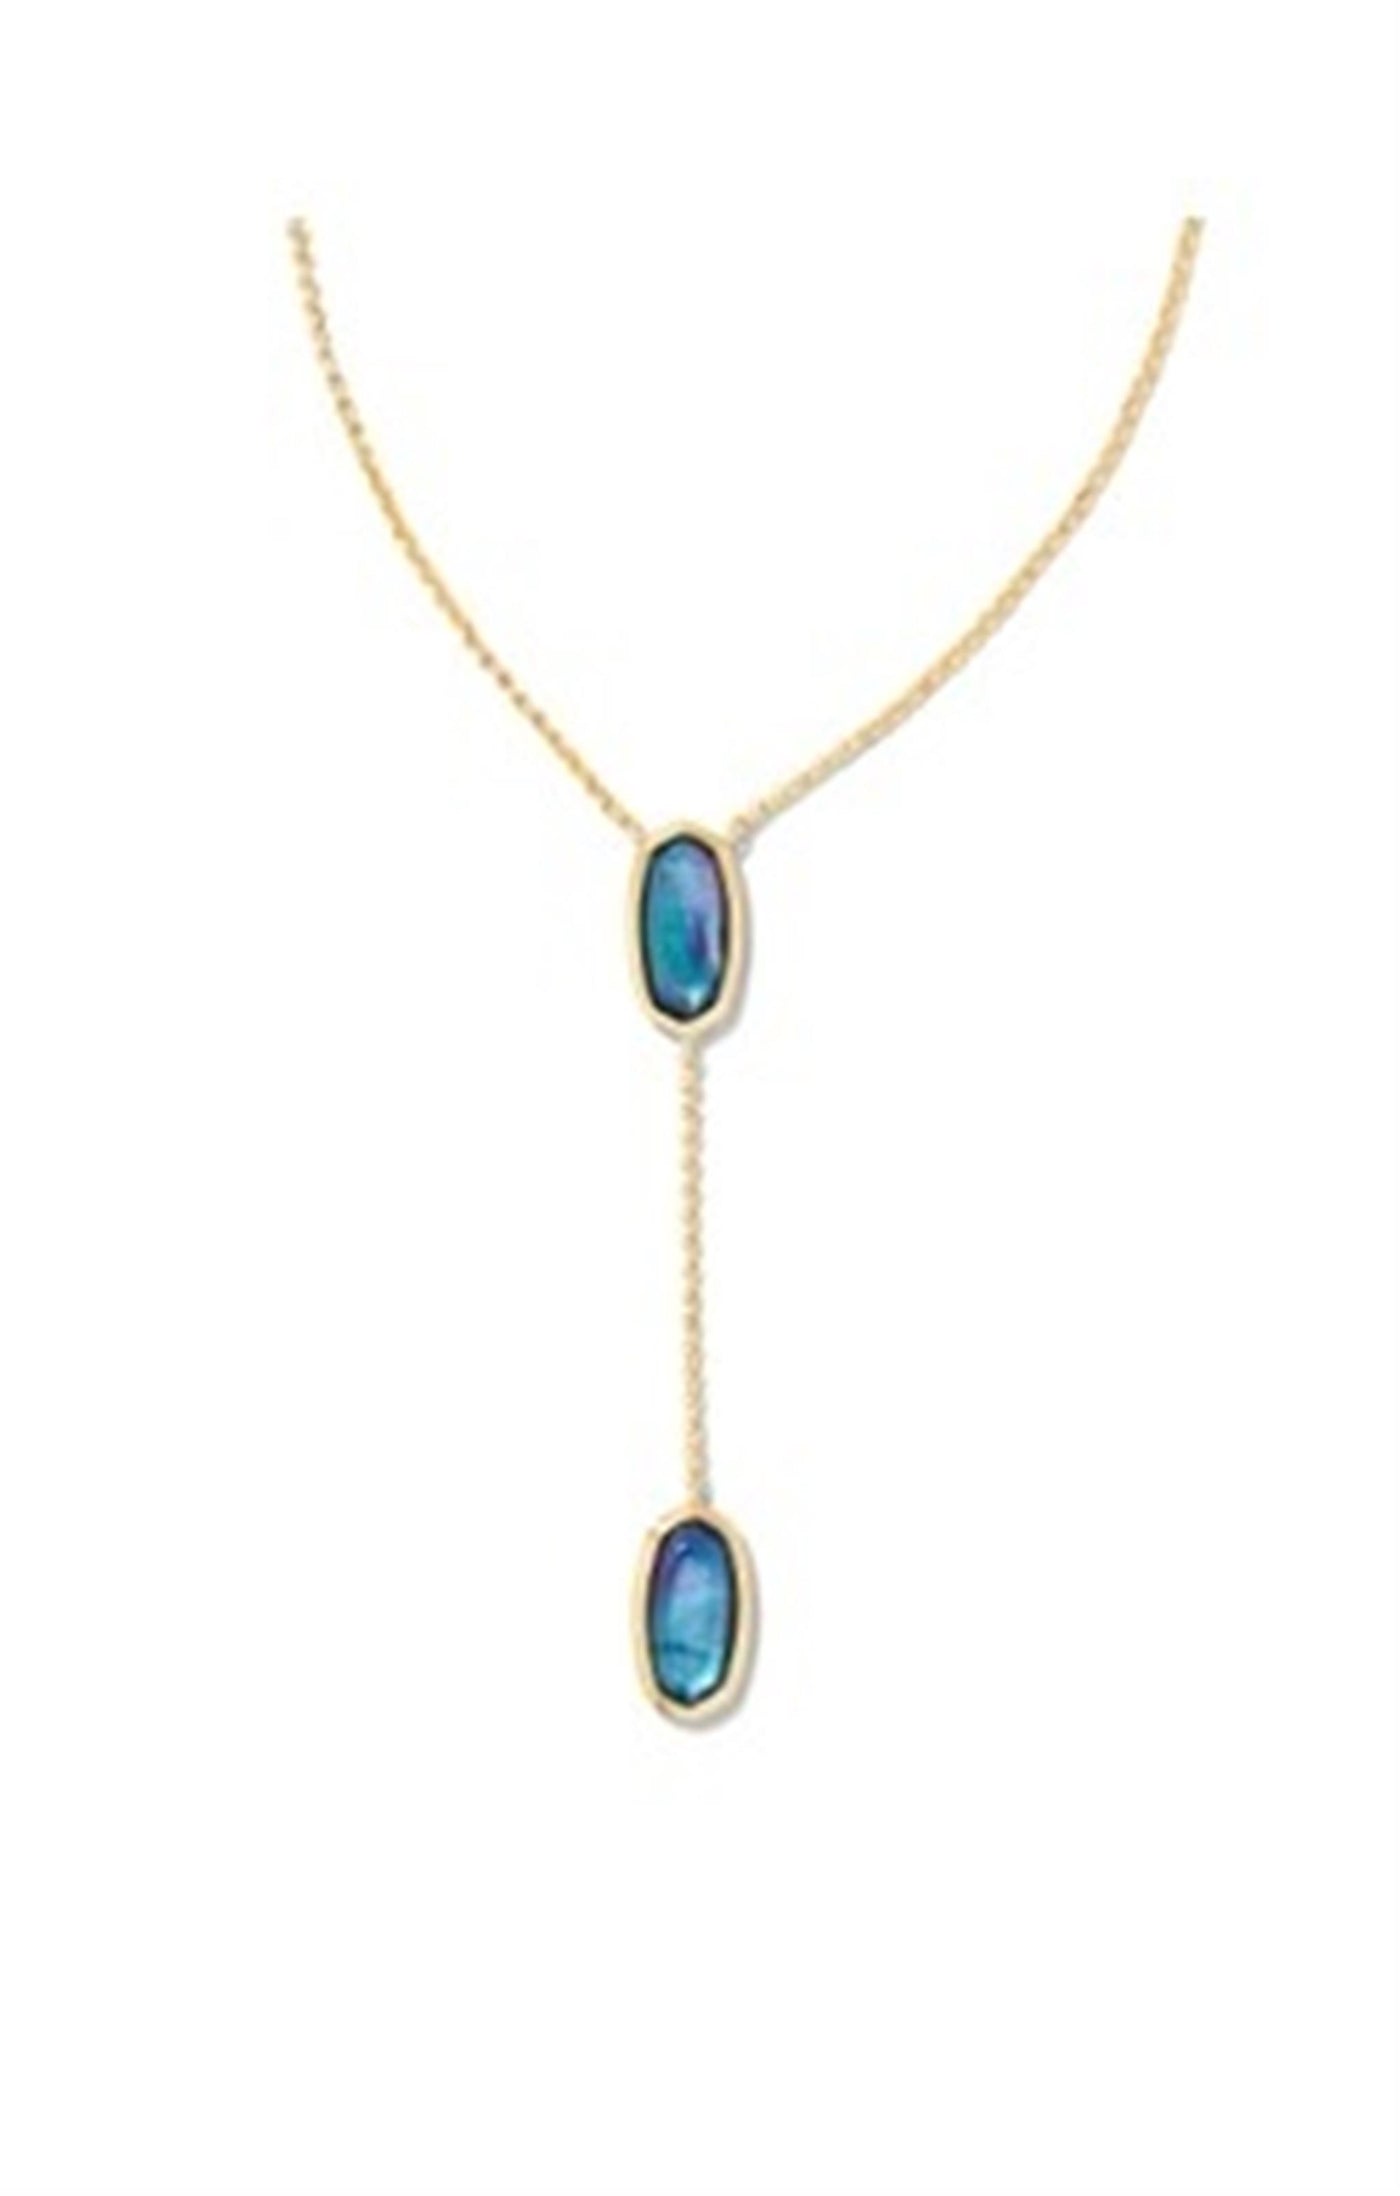 Gold Tone Necklace Featuring Dark Blue Mother of Pearl by Kendra Scott